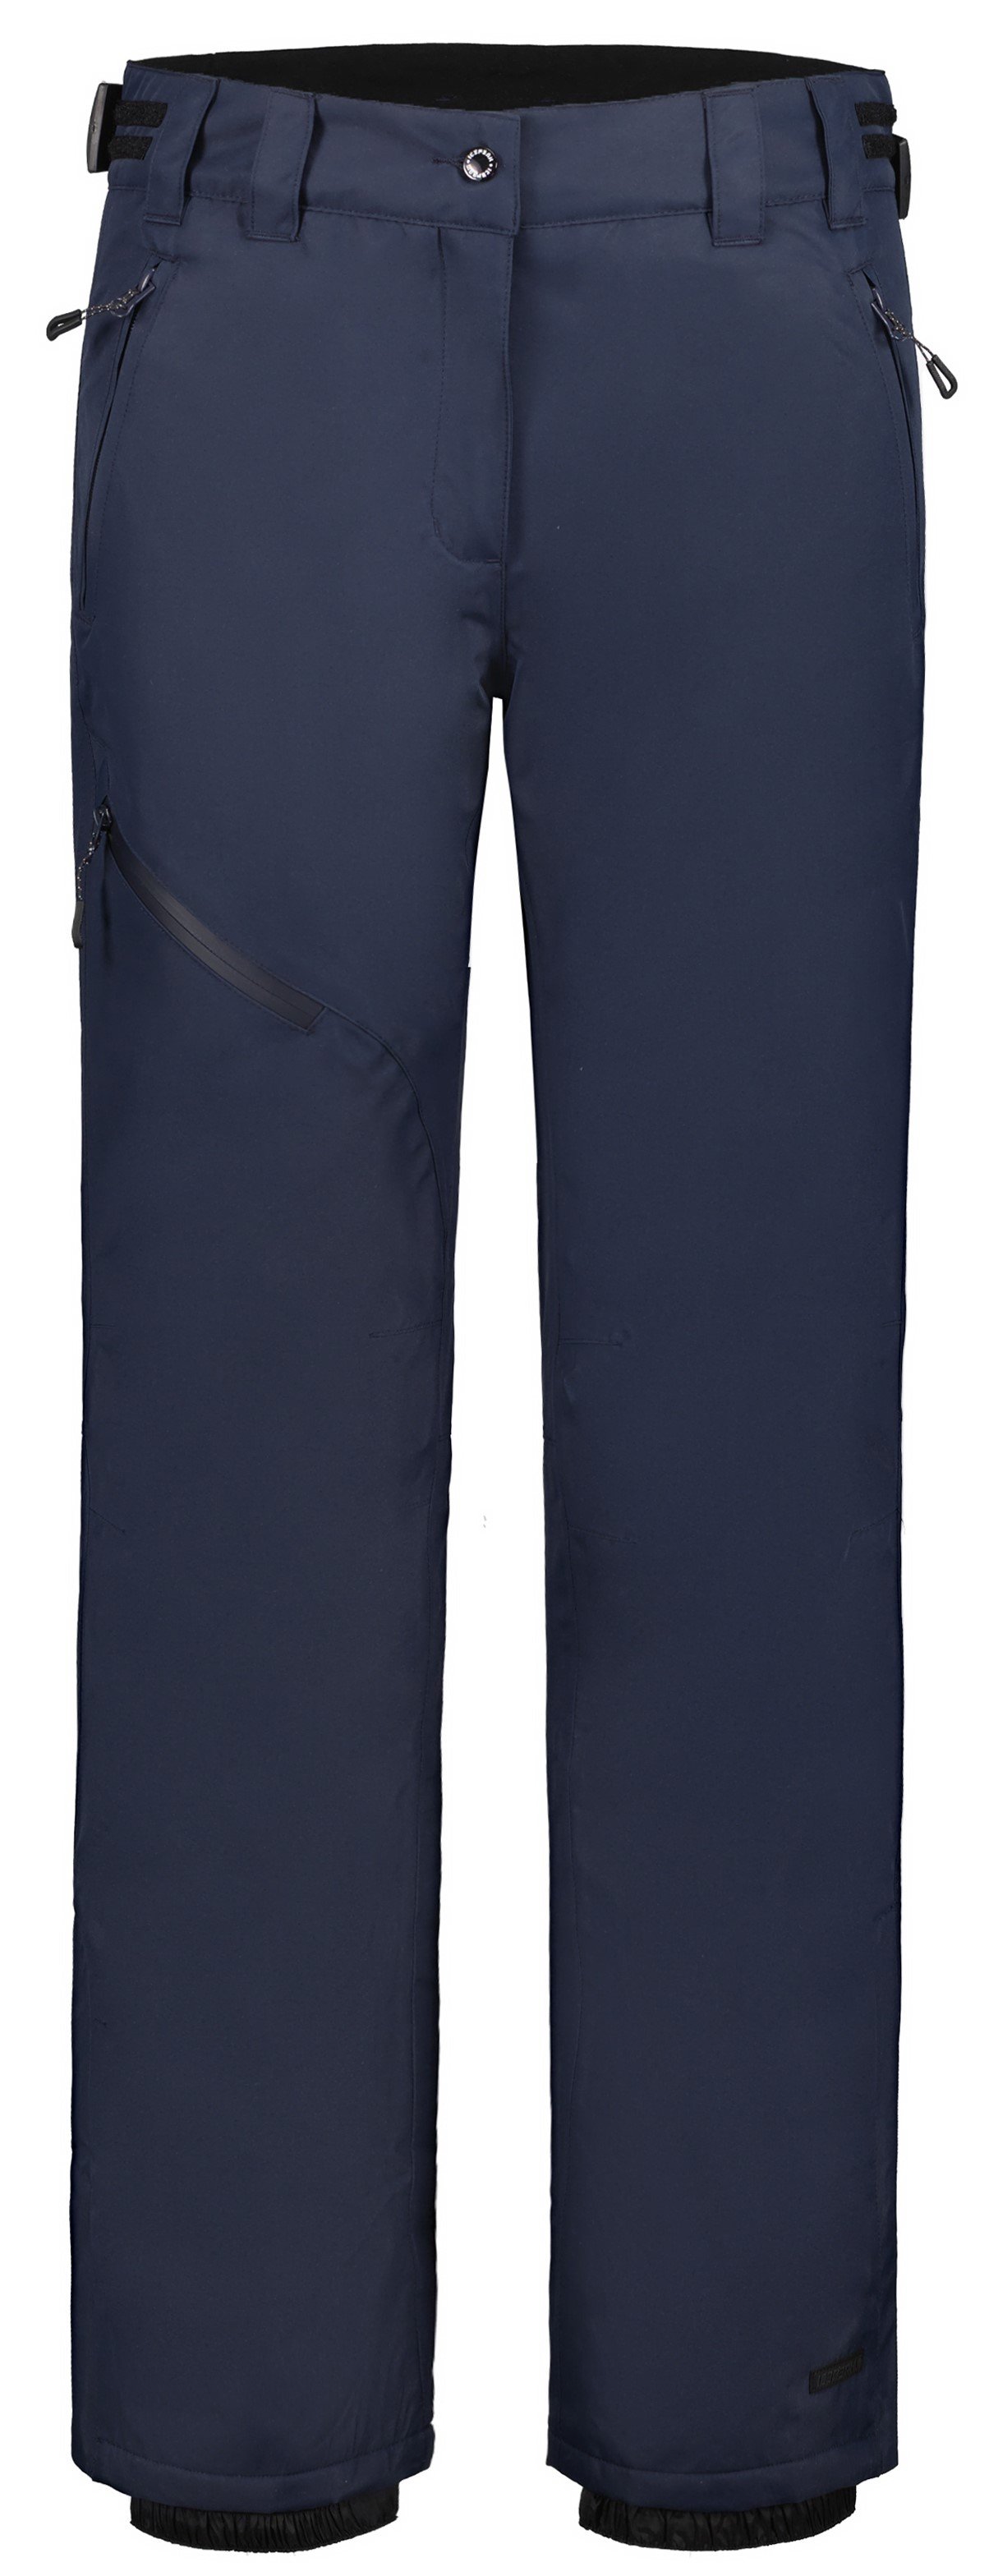 Icepeak Curlew Trousers W 42